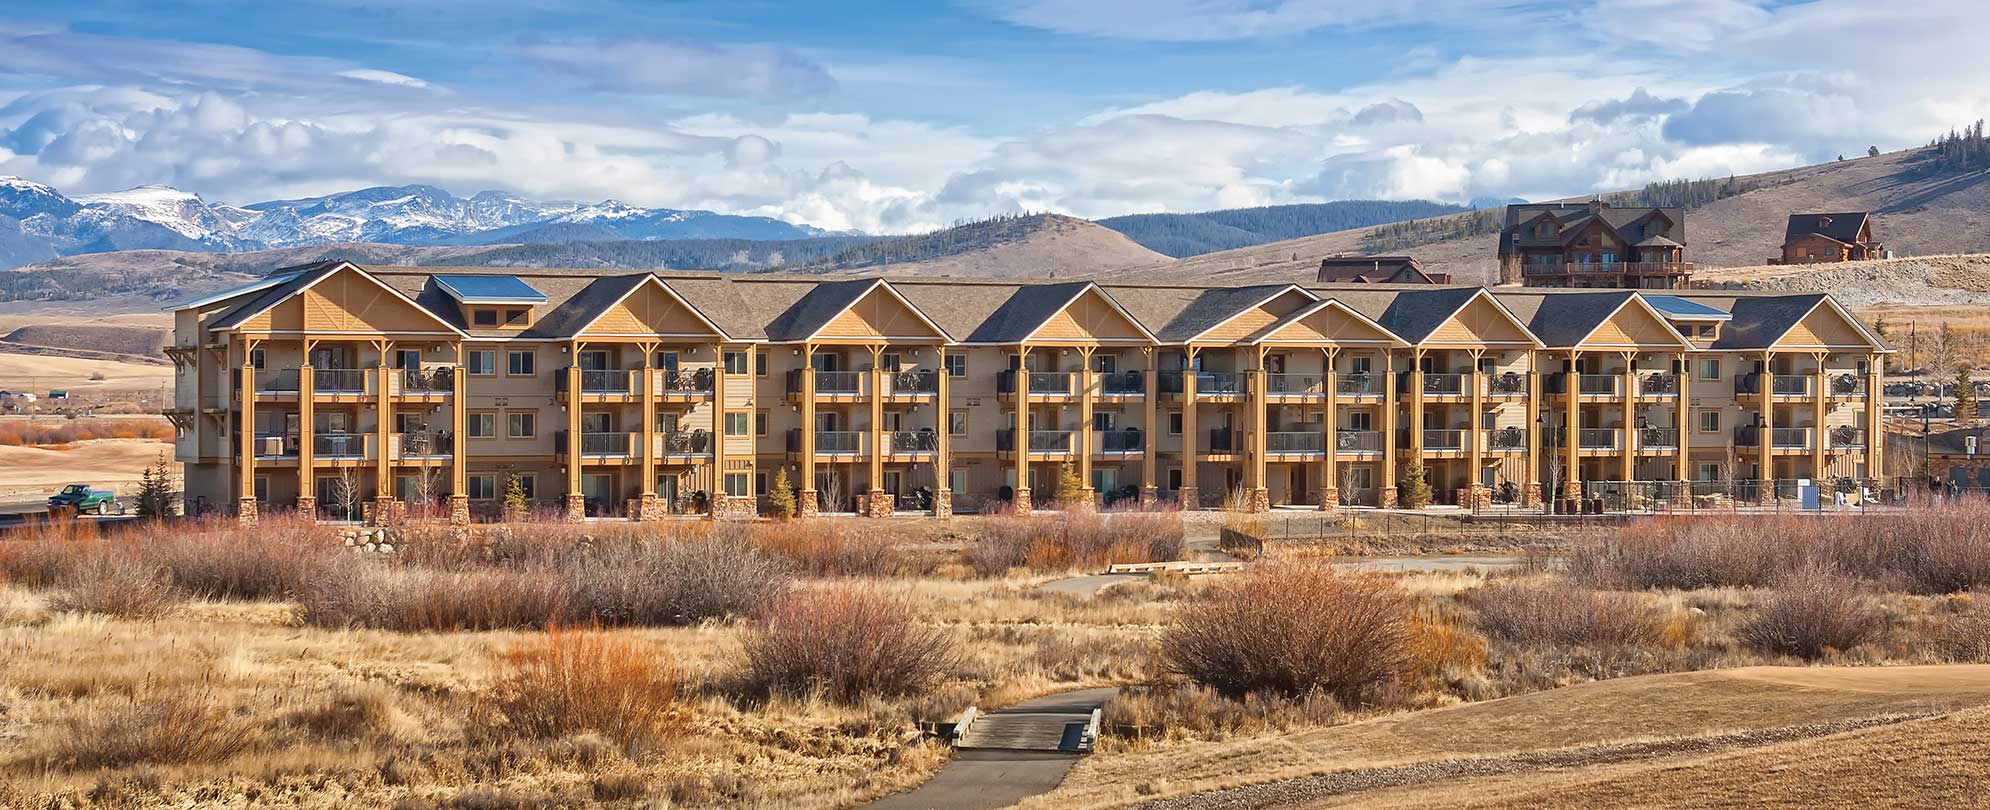 The WorldMark Rocky Mountain Preserve resort with mountains in Granby, Colorado